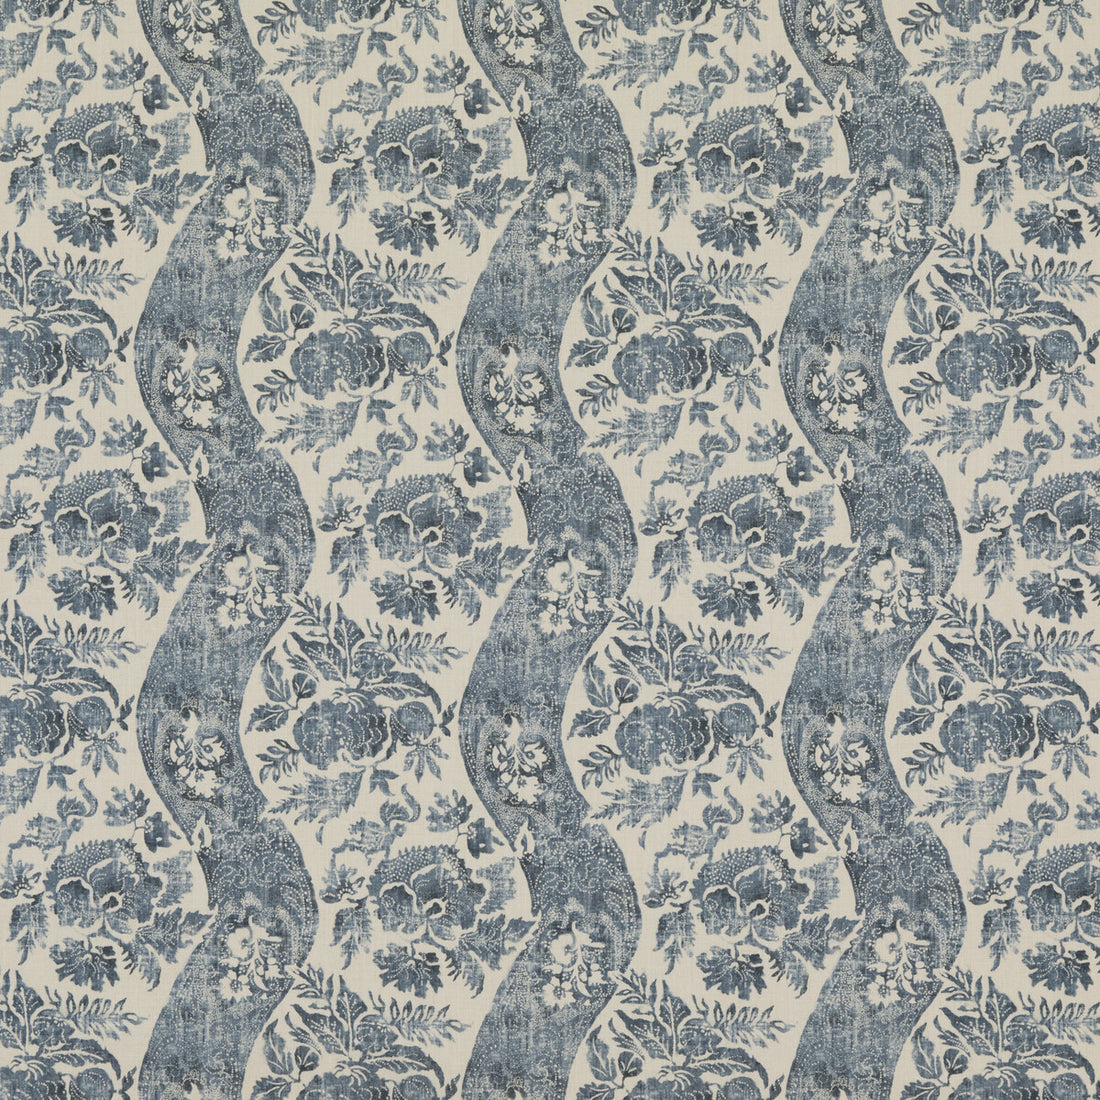 Caldbeck fabric in indigo/linen color - pattern BP10776.2.0 - by G P &amp; J Baker in the Signature Prints collection